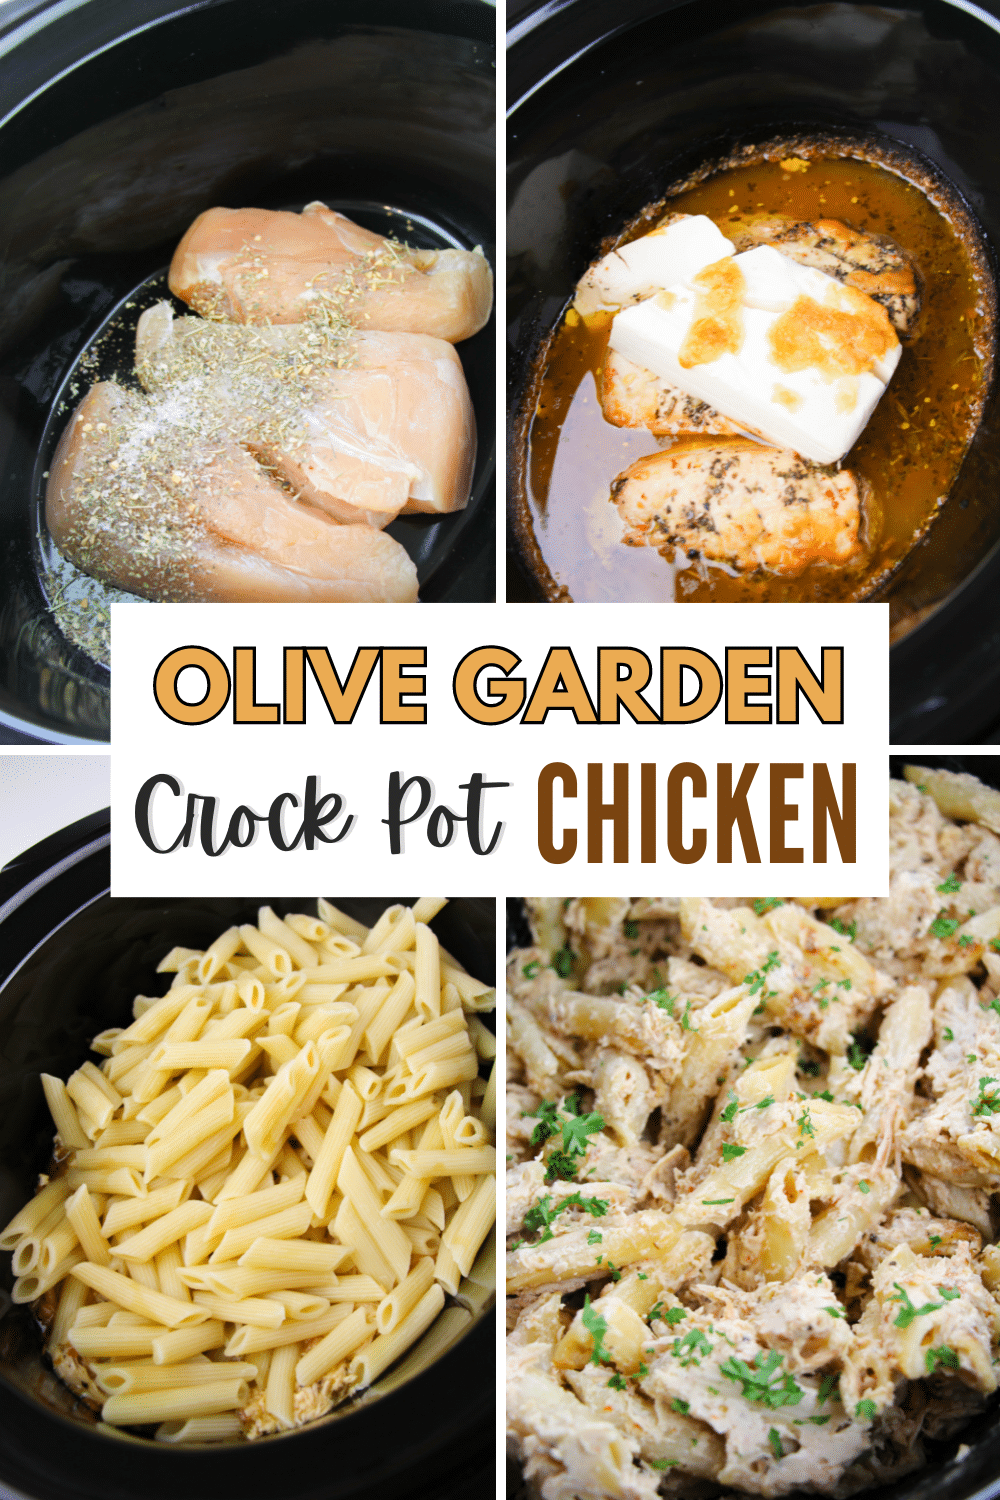 Olive Garden Crock Pot Chicken is a delectable dish that can be easily prepared in a slow cooker. This recipe captures the essence of Olive Garden's famous flavors and combines it with the convenience